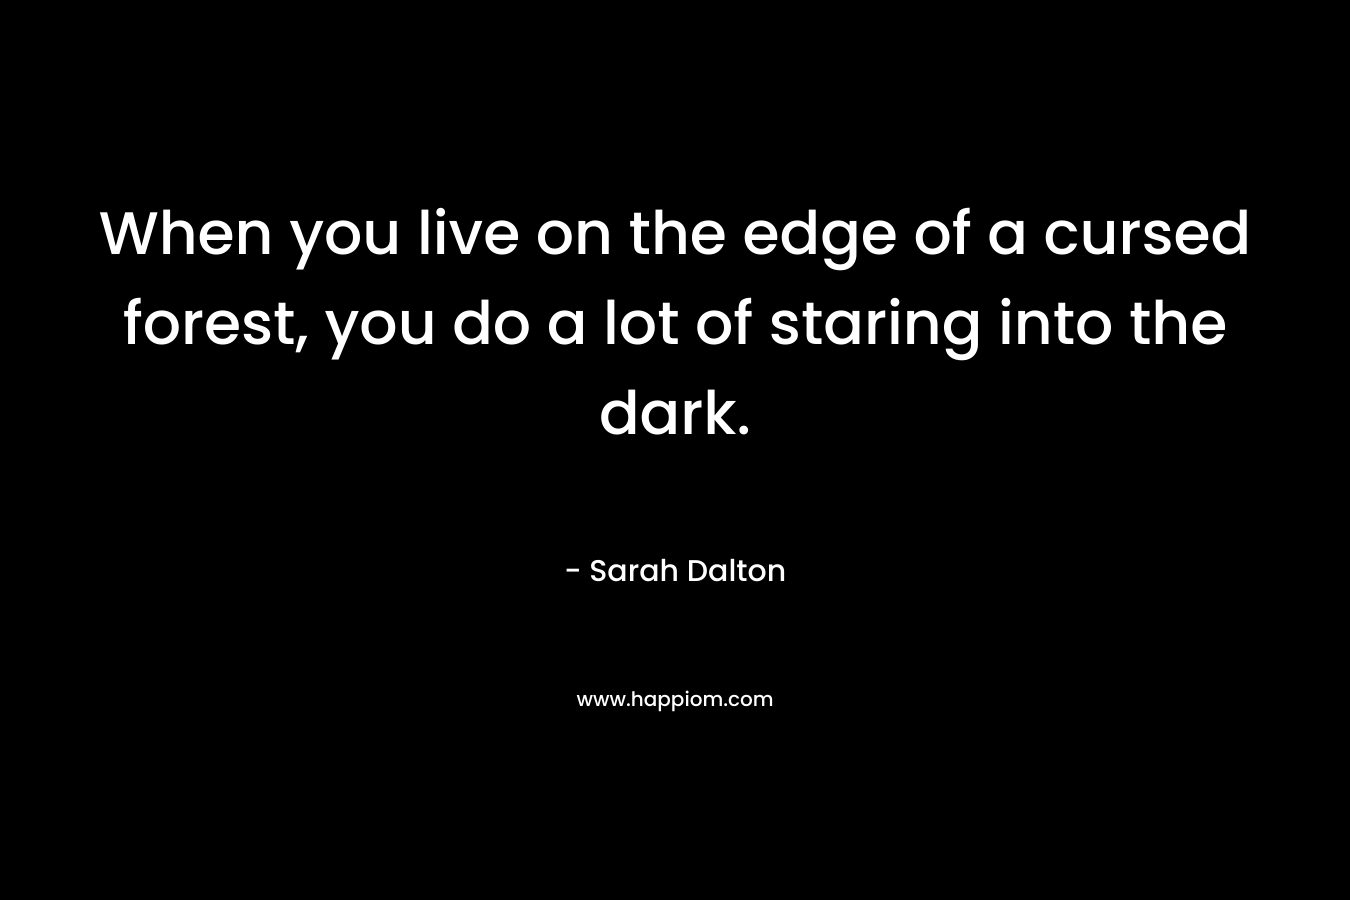 When you live on the edge of a cursed forest, you do a lot of staring into the dark. – Sarah Dalton